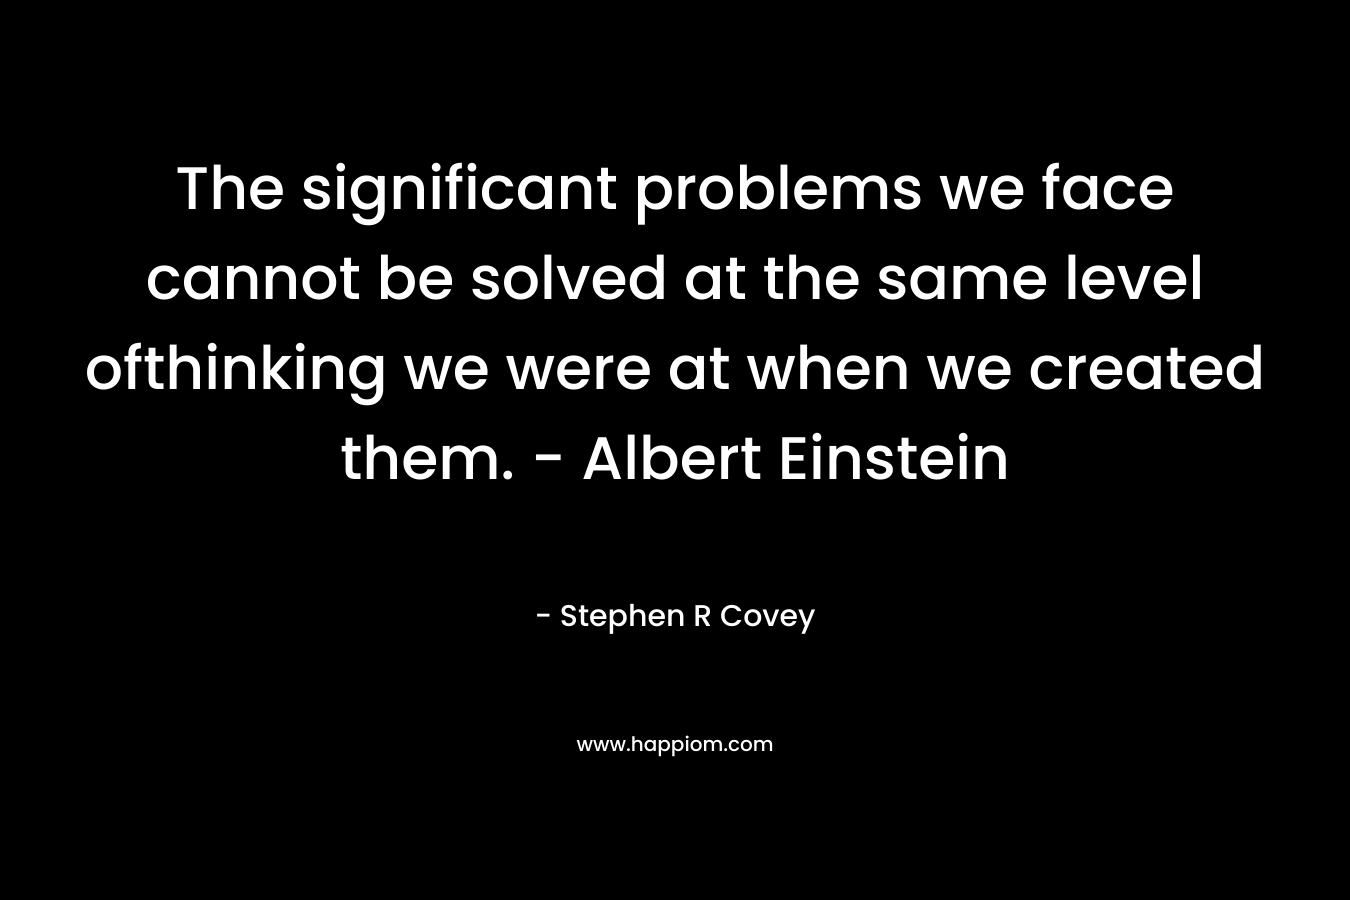 The significant problems we face cannot be solved at the same level ofthinking we were at when we created them. - Albert Einstein